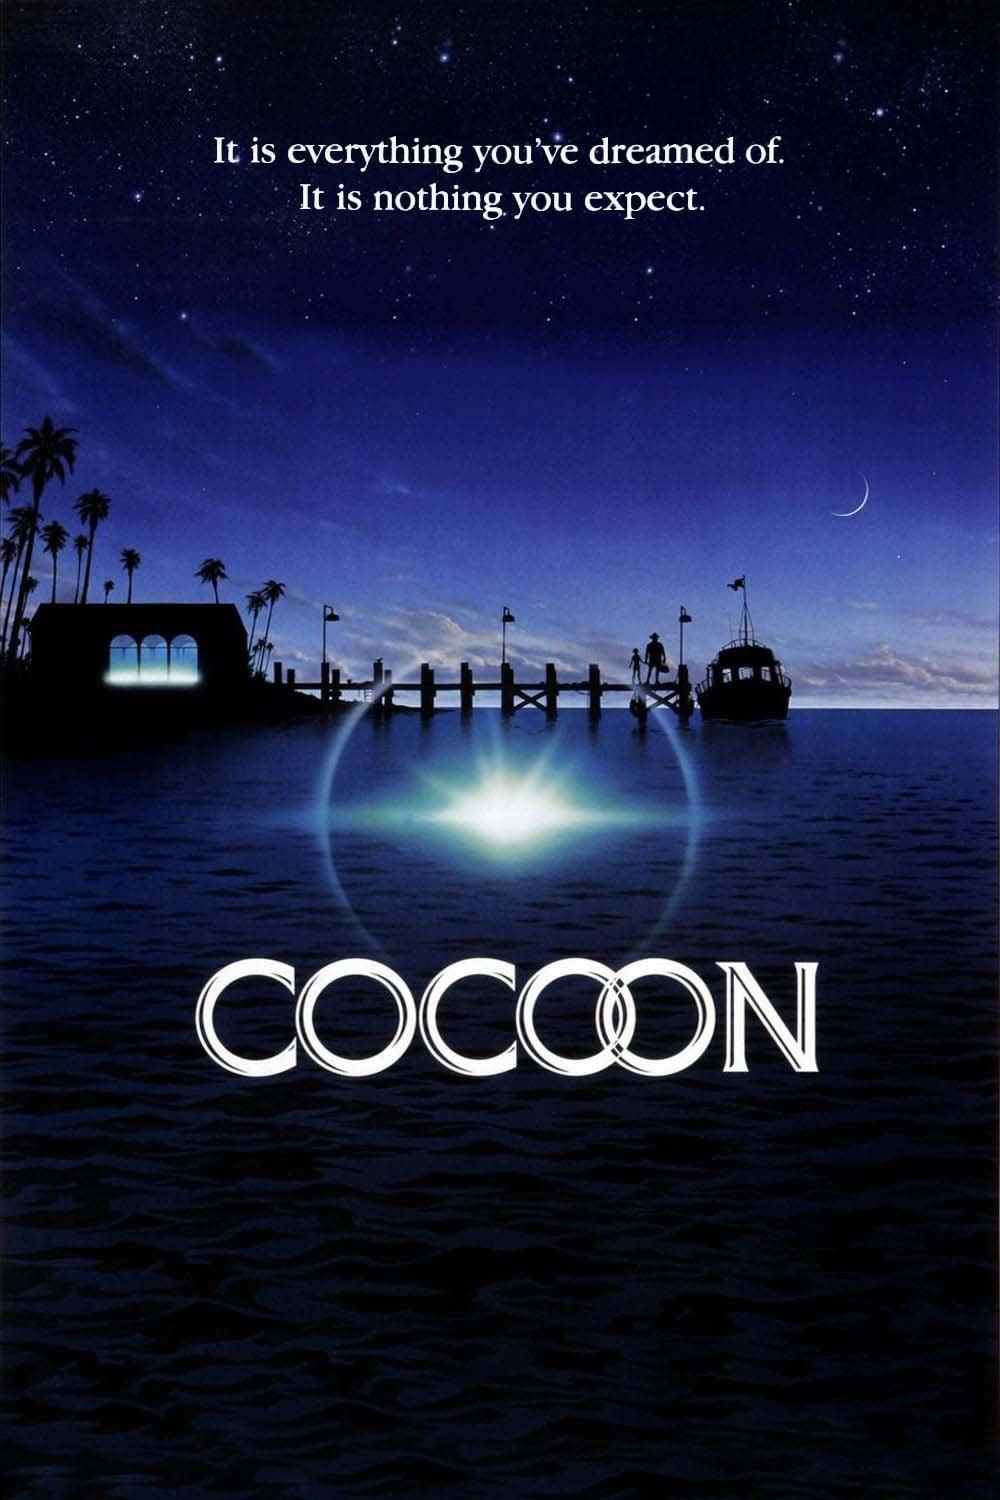 Cocoon poster